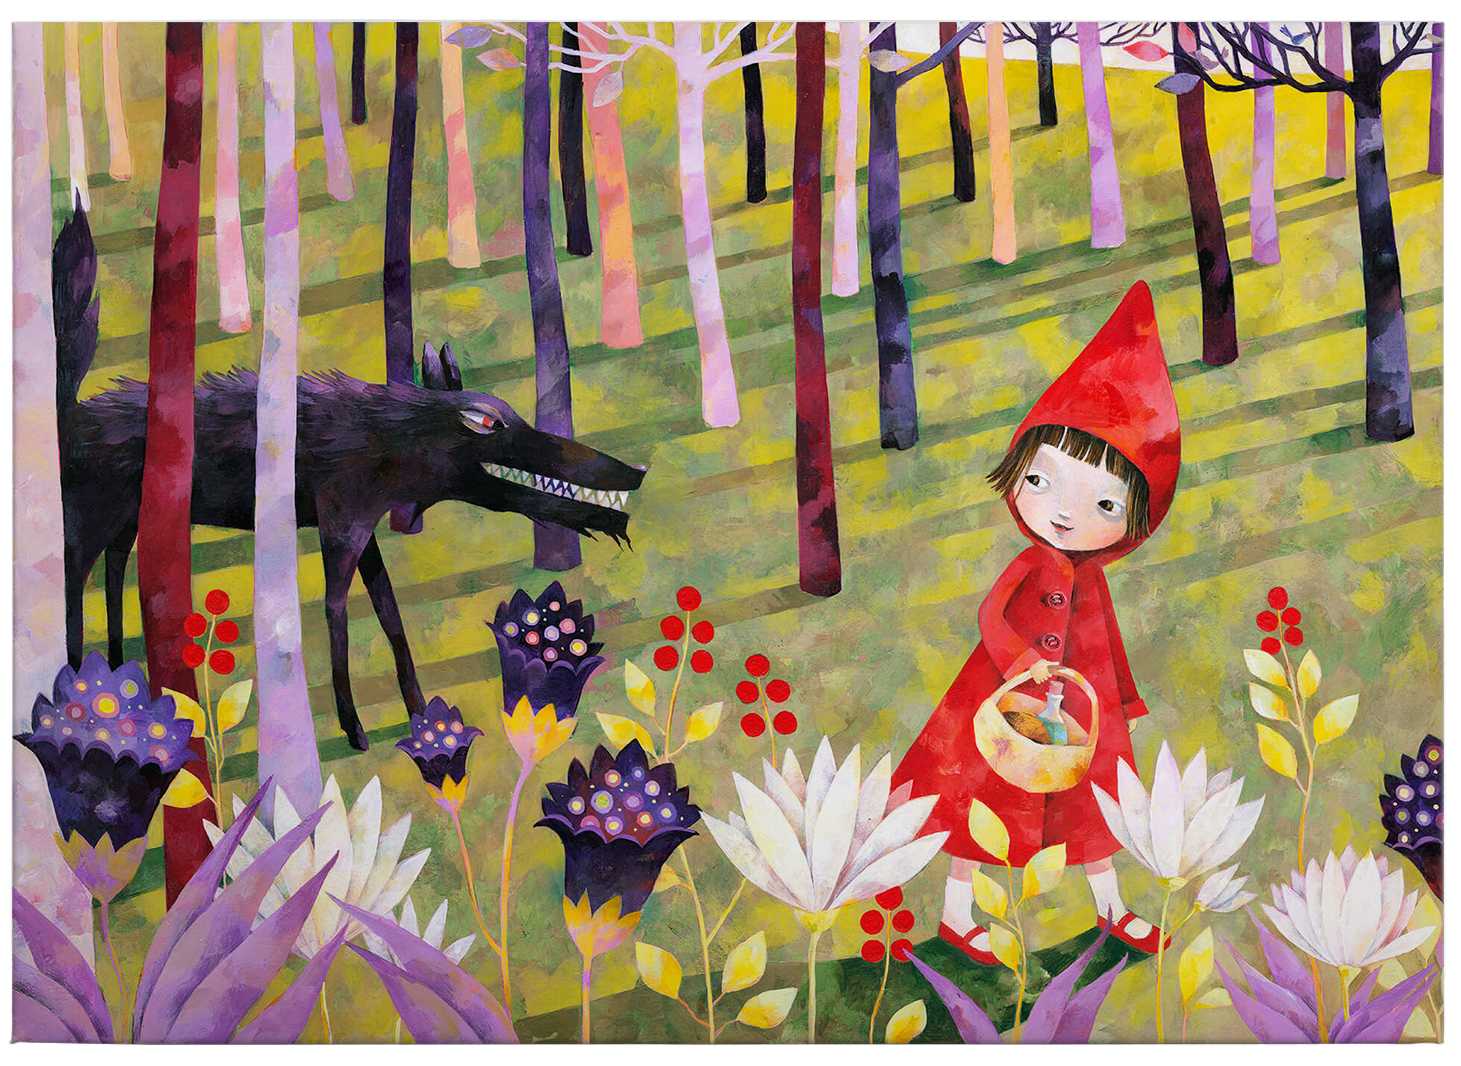             Canvas print little red riding hood wolf forest nature
        